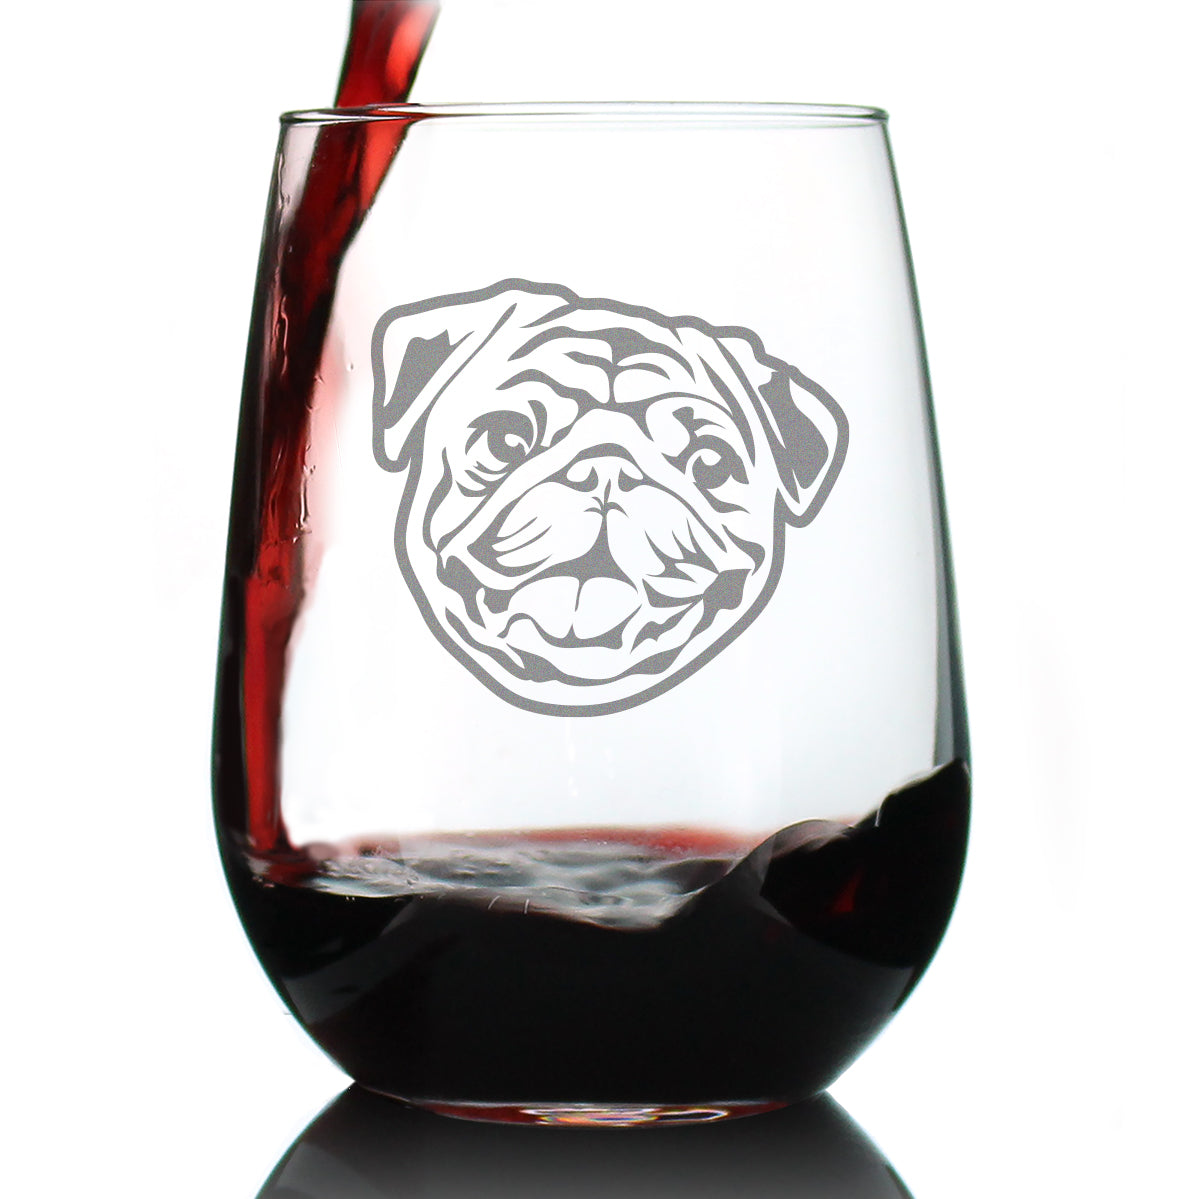 Happy Pug Stemless Wine Glass - Cute Dog Themed Decor and Gifts for Moms &amp; Dads of Pugs - Large 17 Oz Glasses